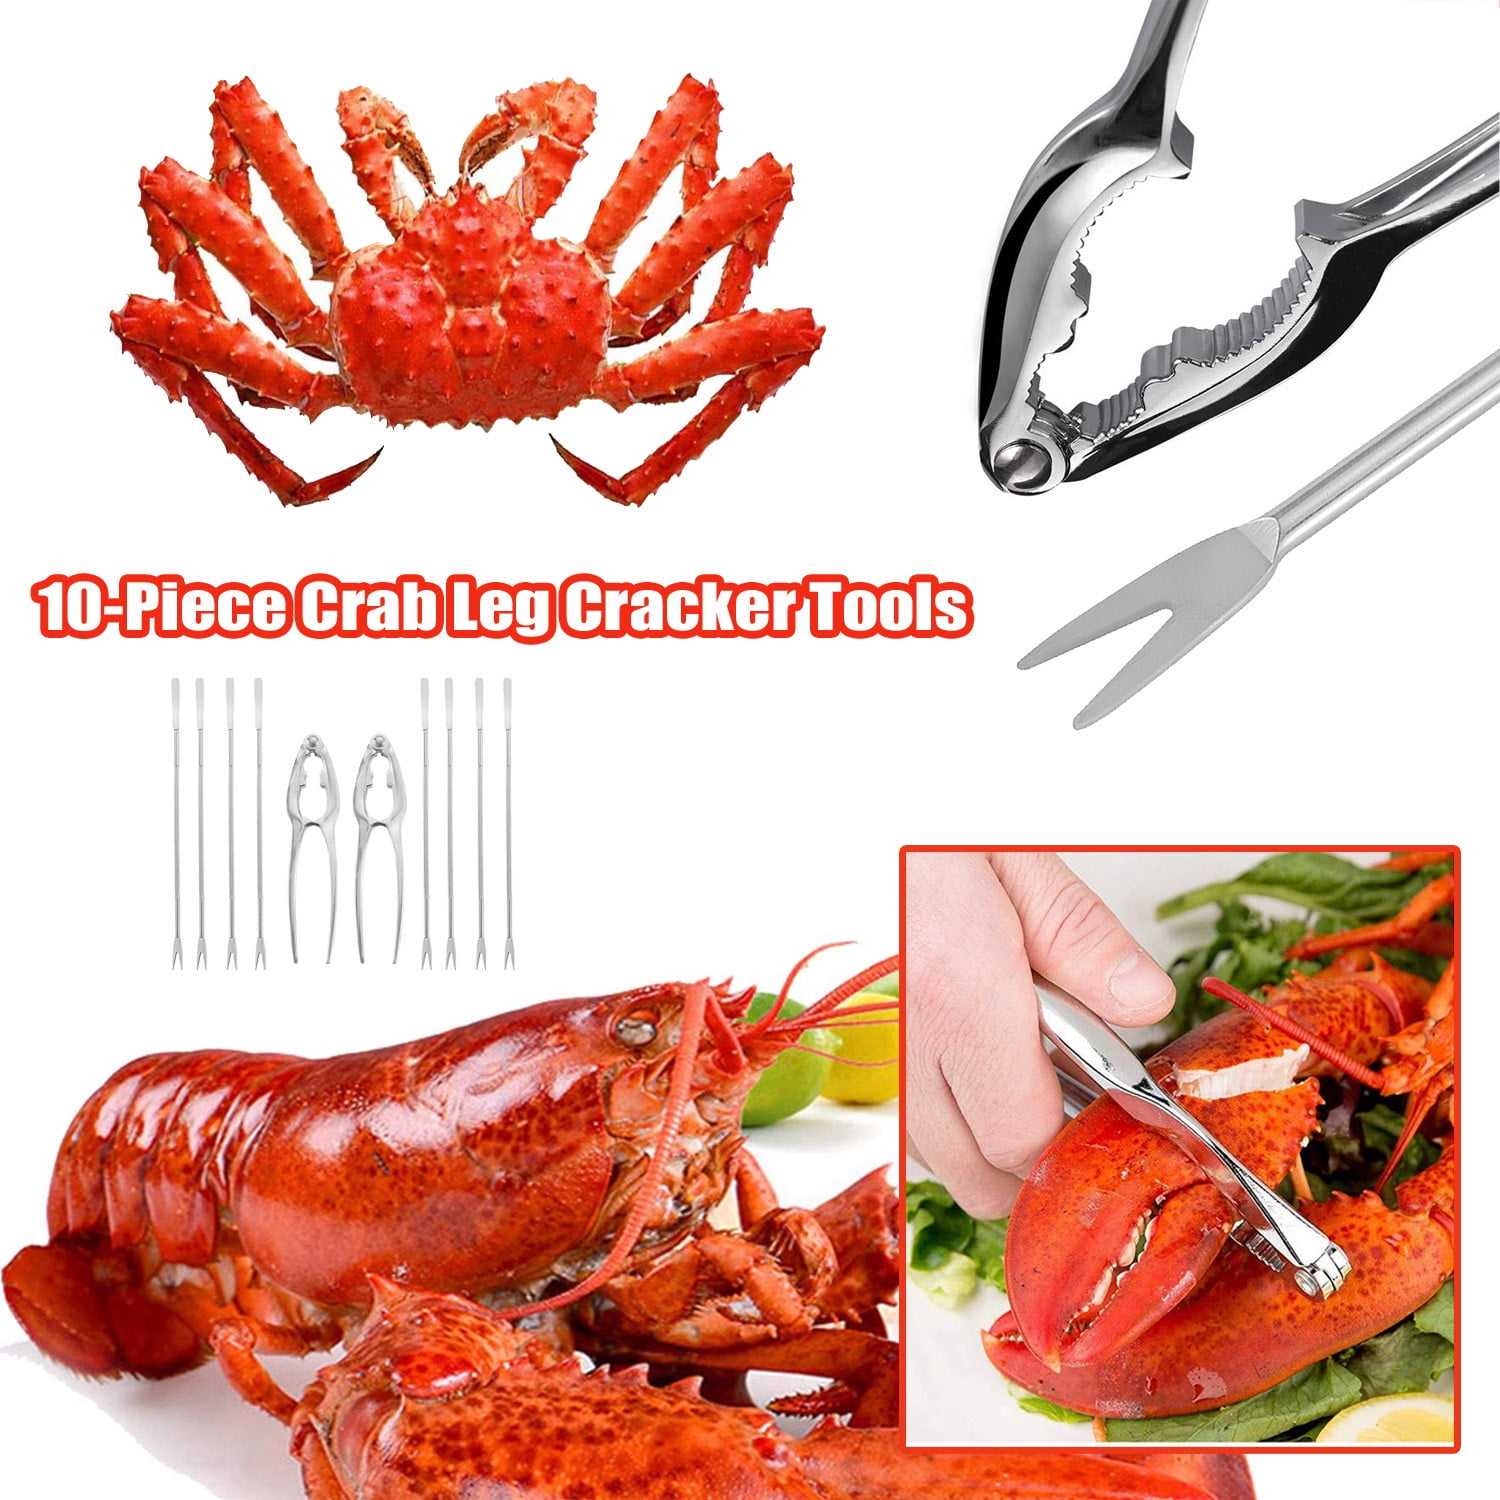 10PCS Crab Nut Crackers and Forks Stainless Steel Seafood Shellfish Tools Kit